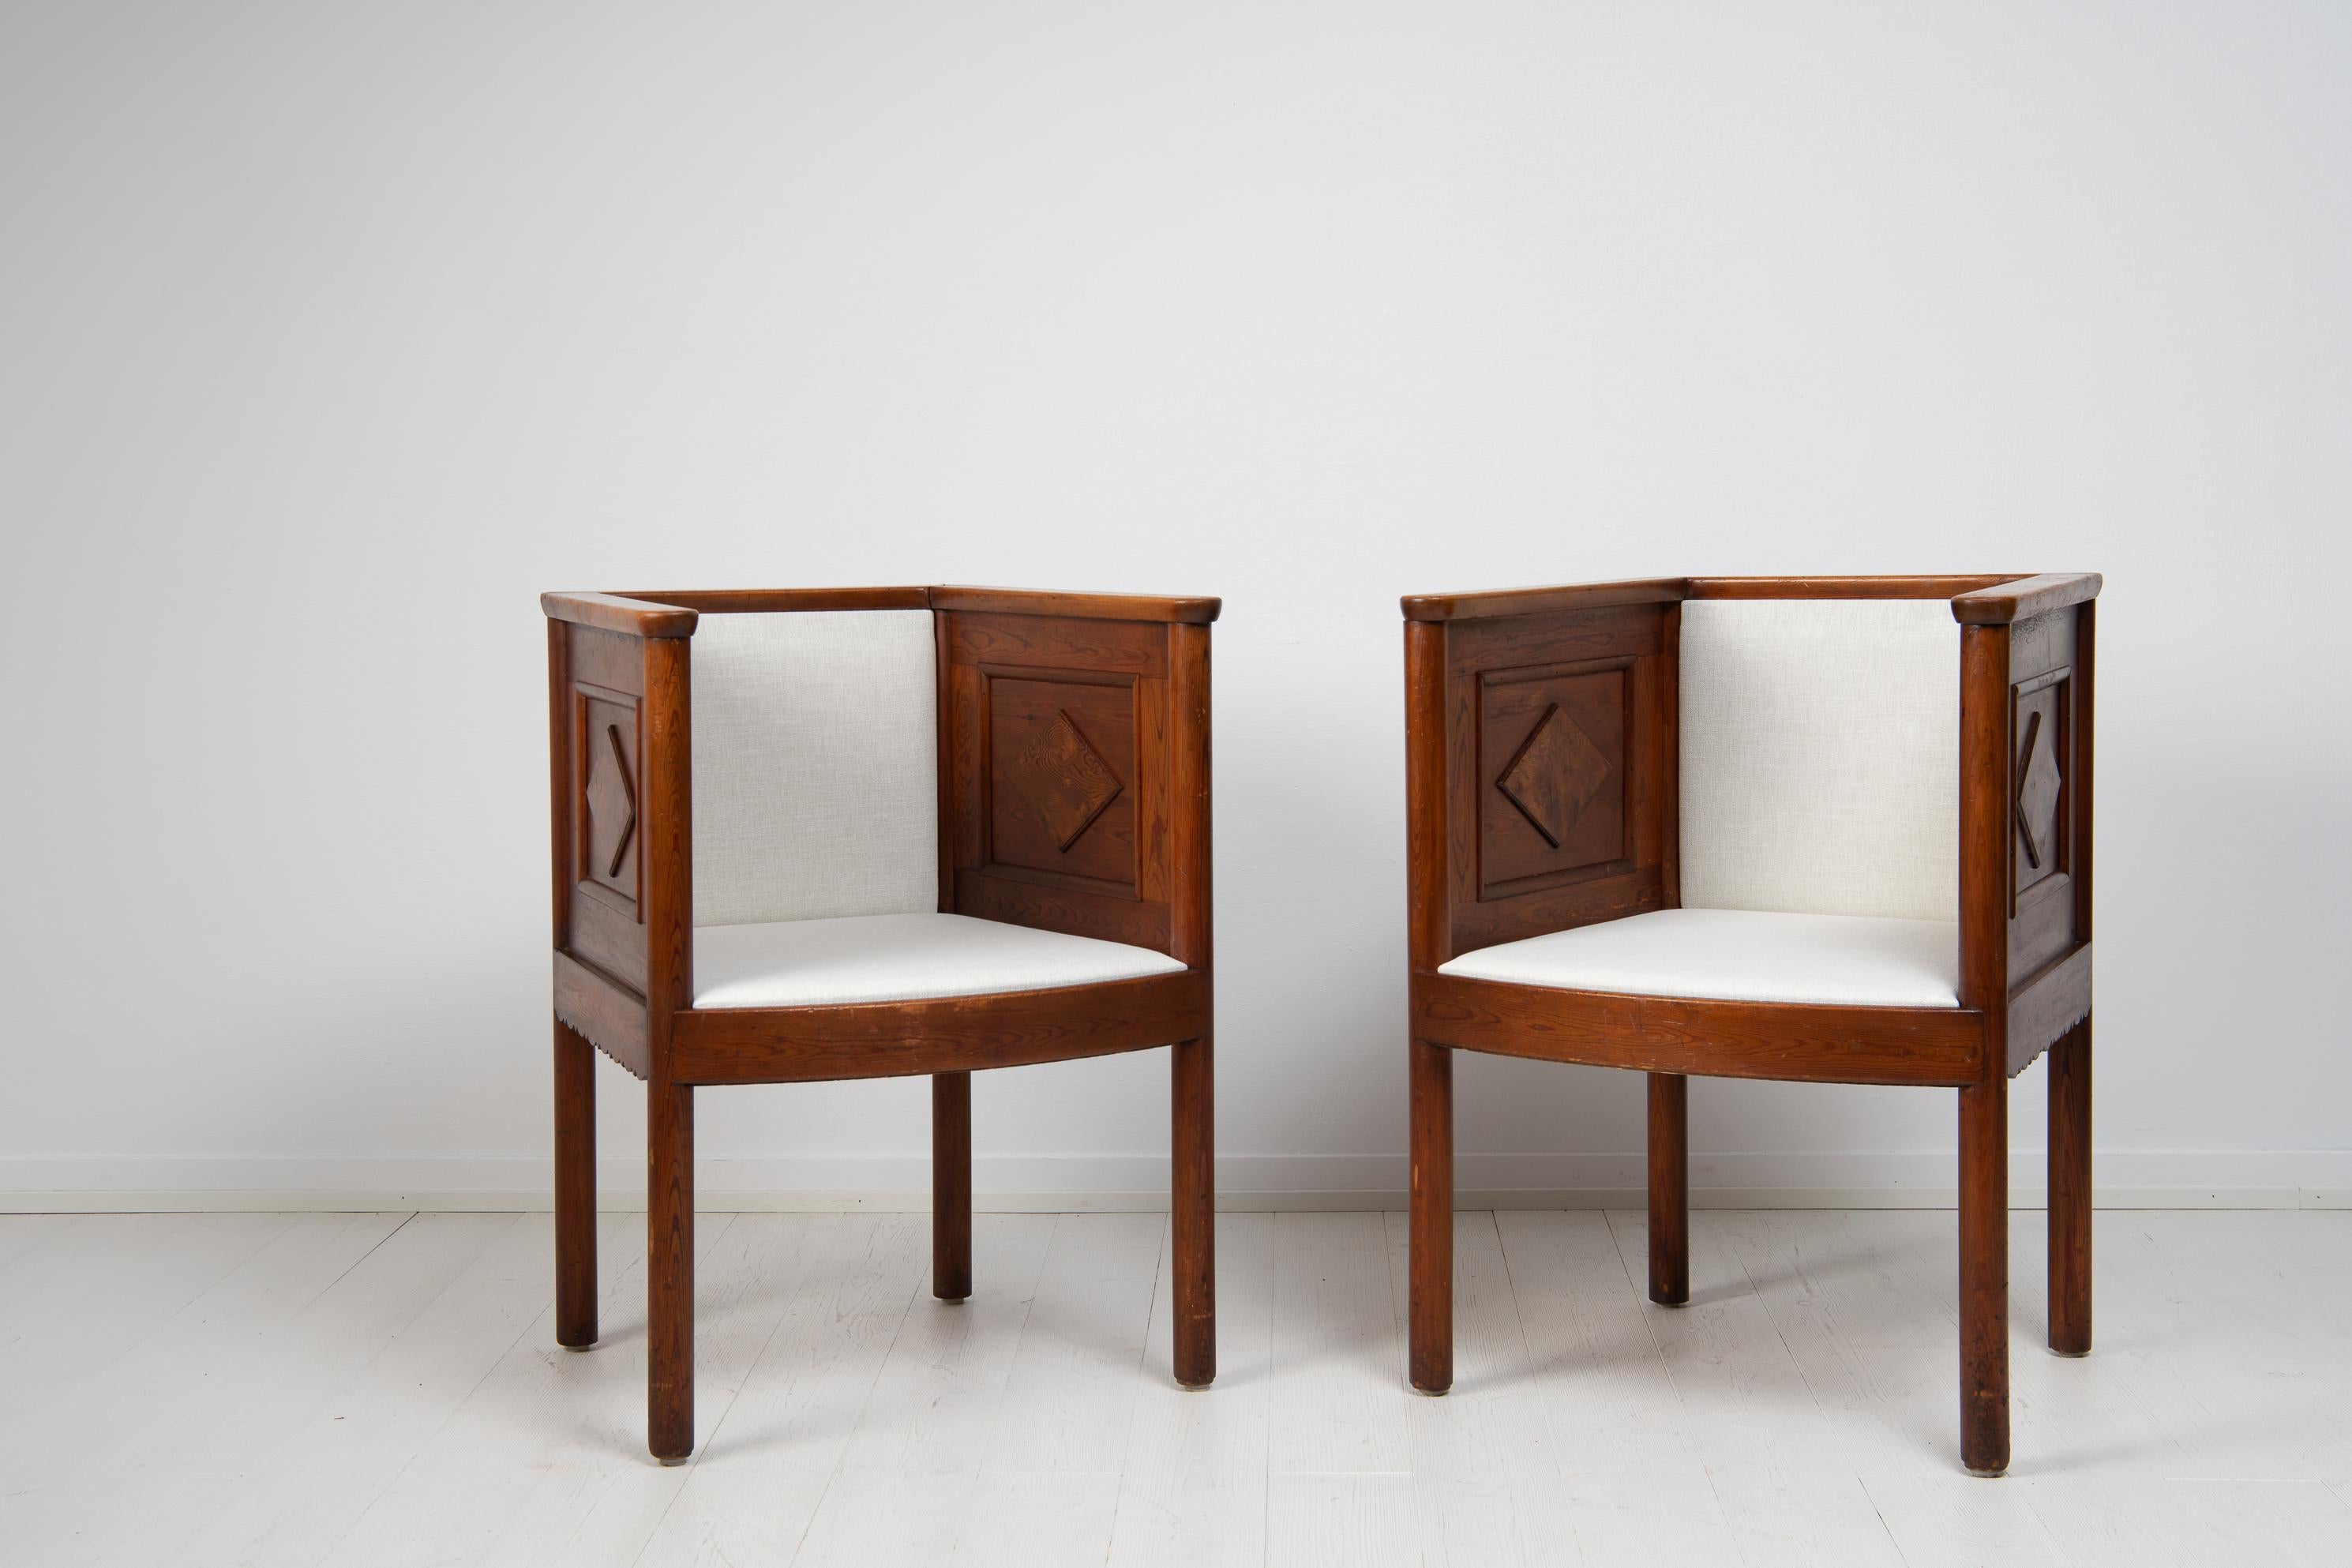 Pair of pine armchairs in the style of Axel Einar Hjorth from Sweden. The armchairs are from the 1920s to 1930s. The designer and maker of these are unknown however they are in the characteristic style of Axel Einar Hjorth. The chairs are a so